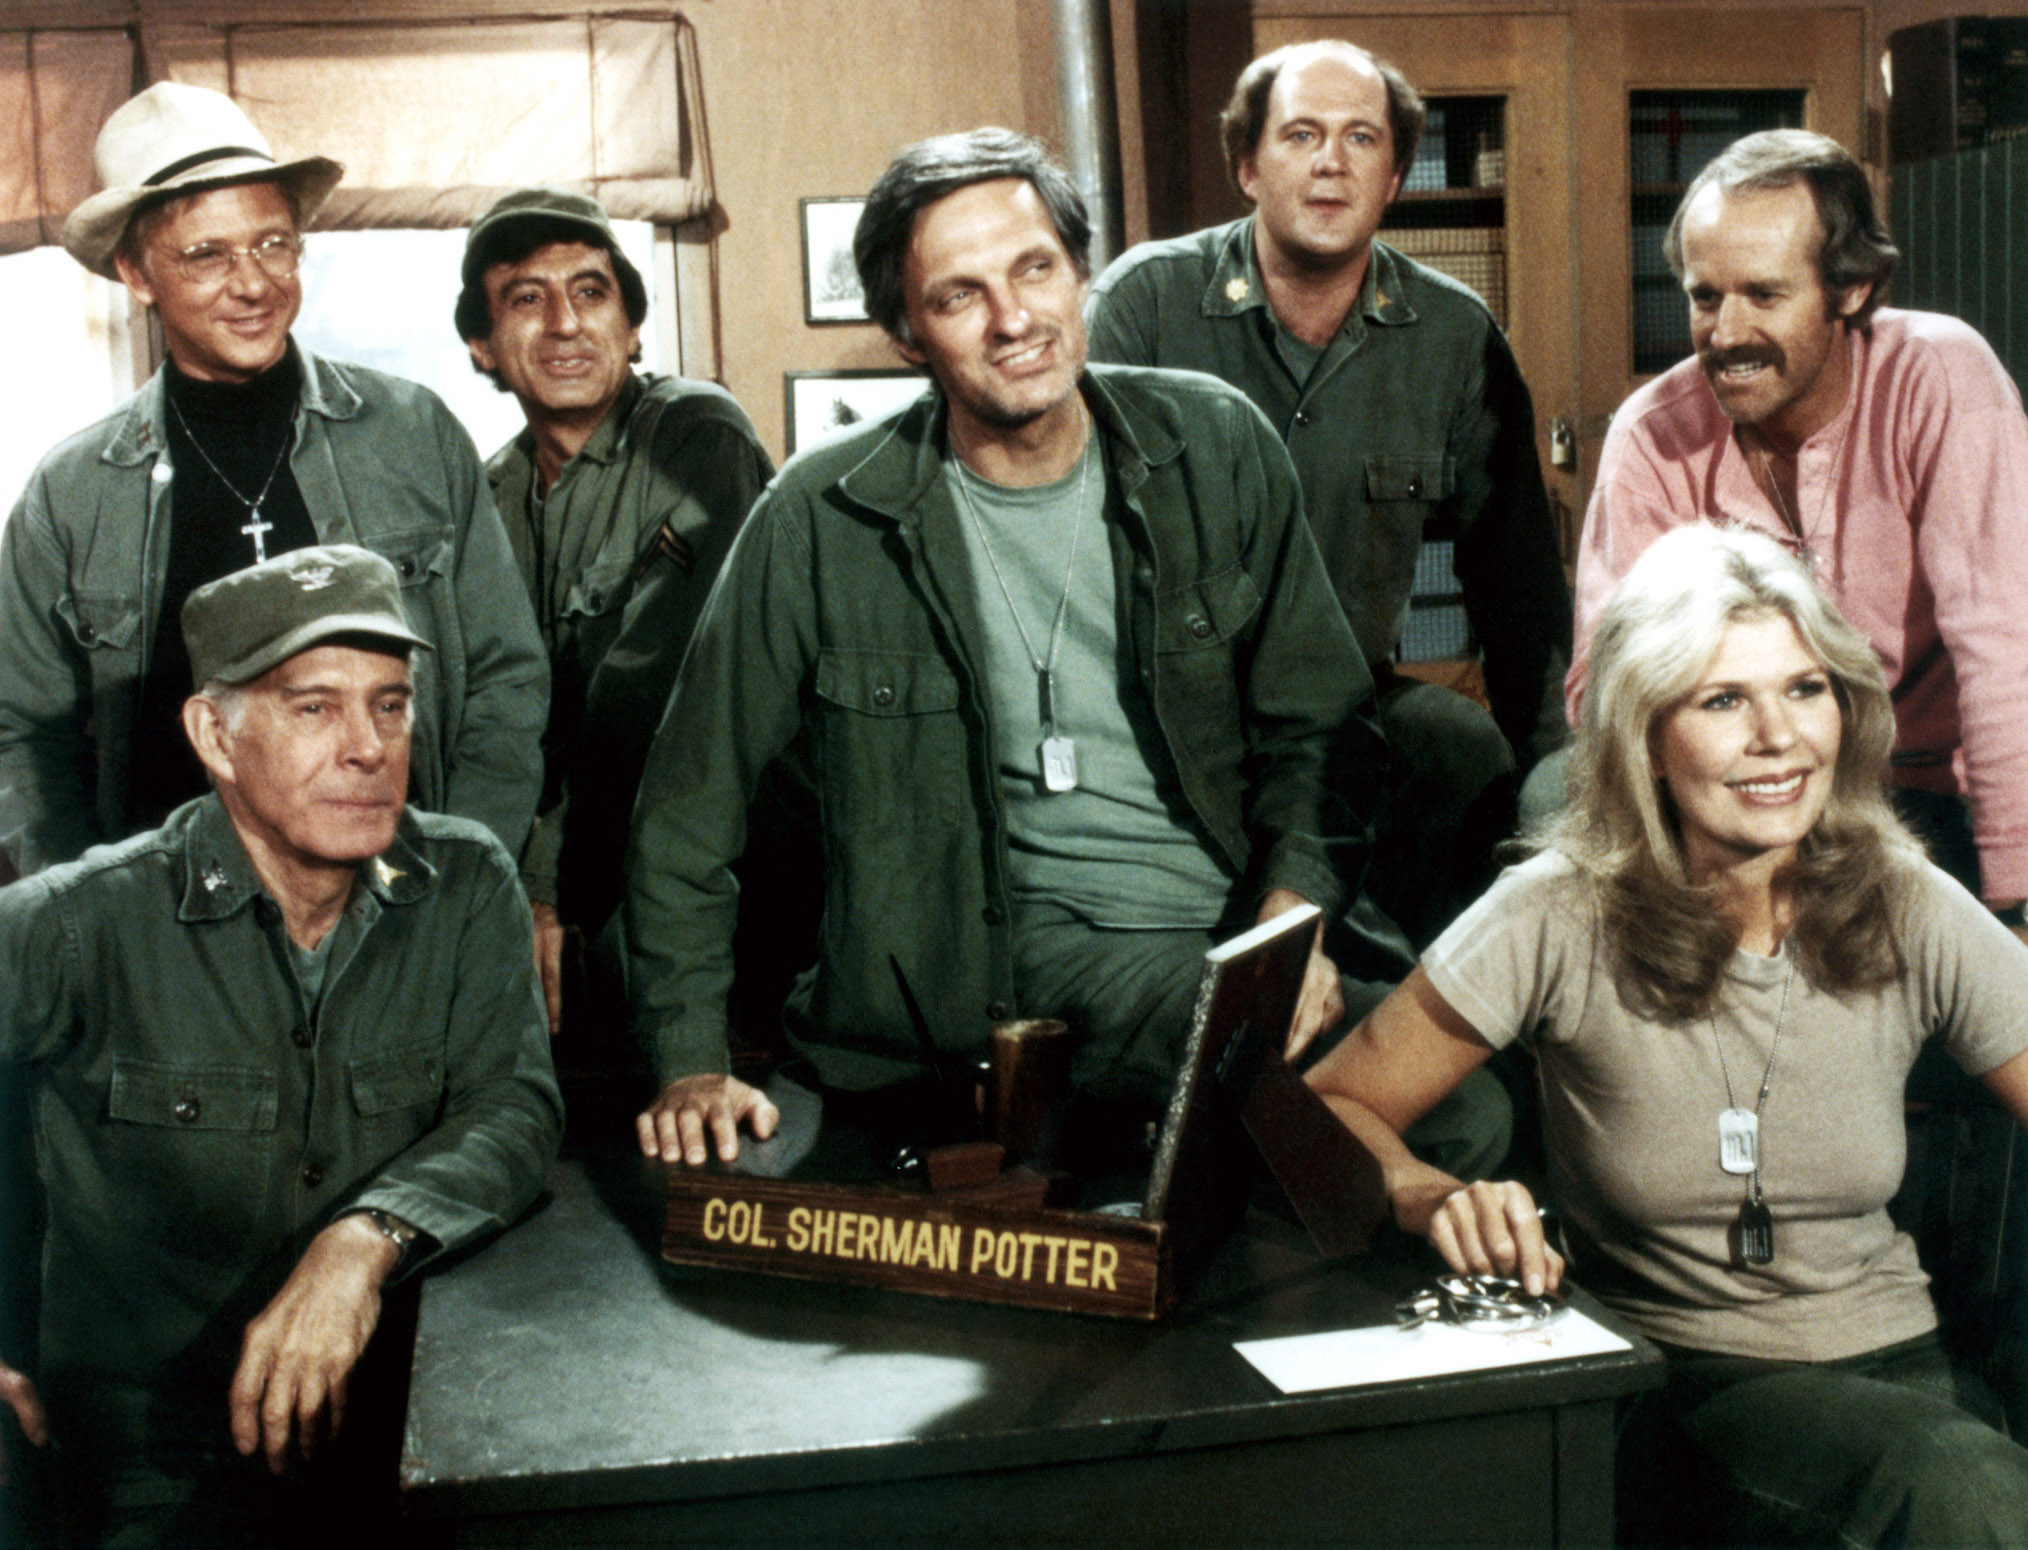 Alan Alda Reunites with MASH Costar Mike Farrell for 50th Anniversary